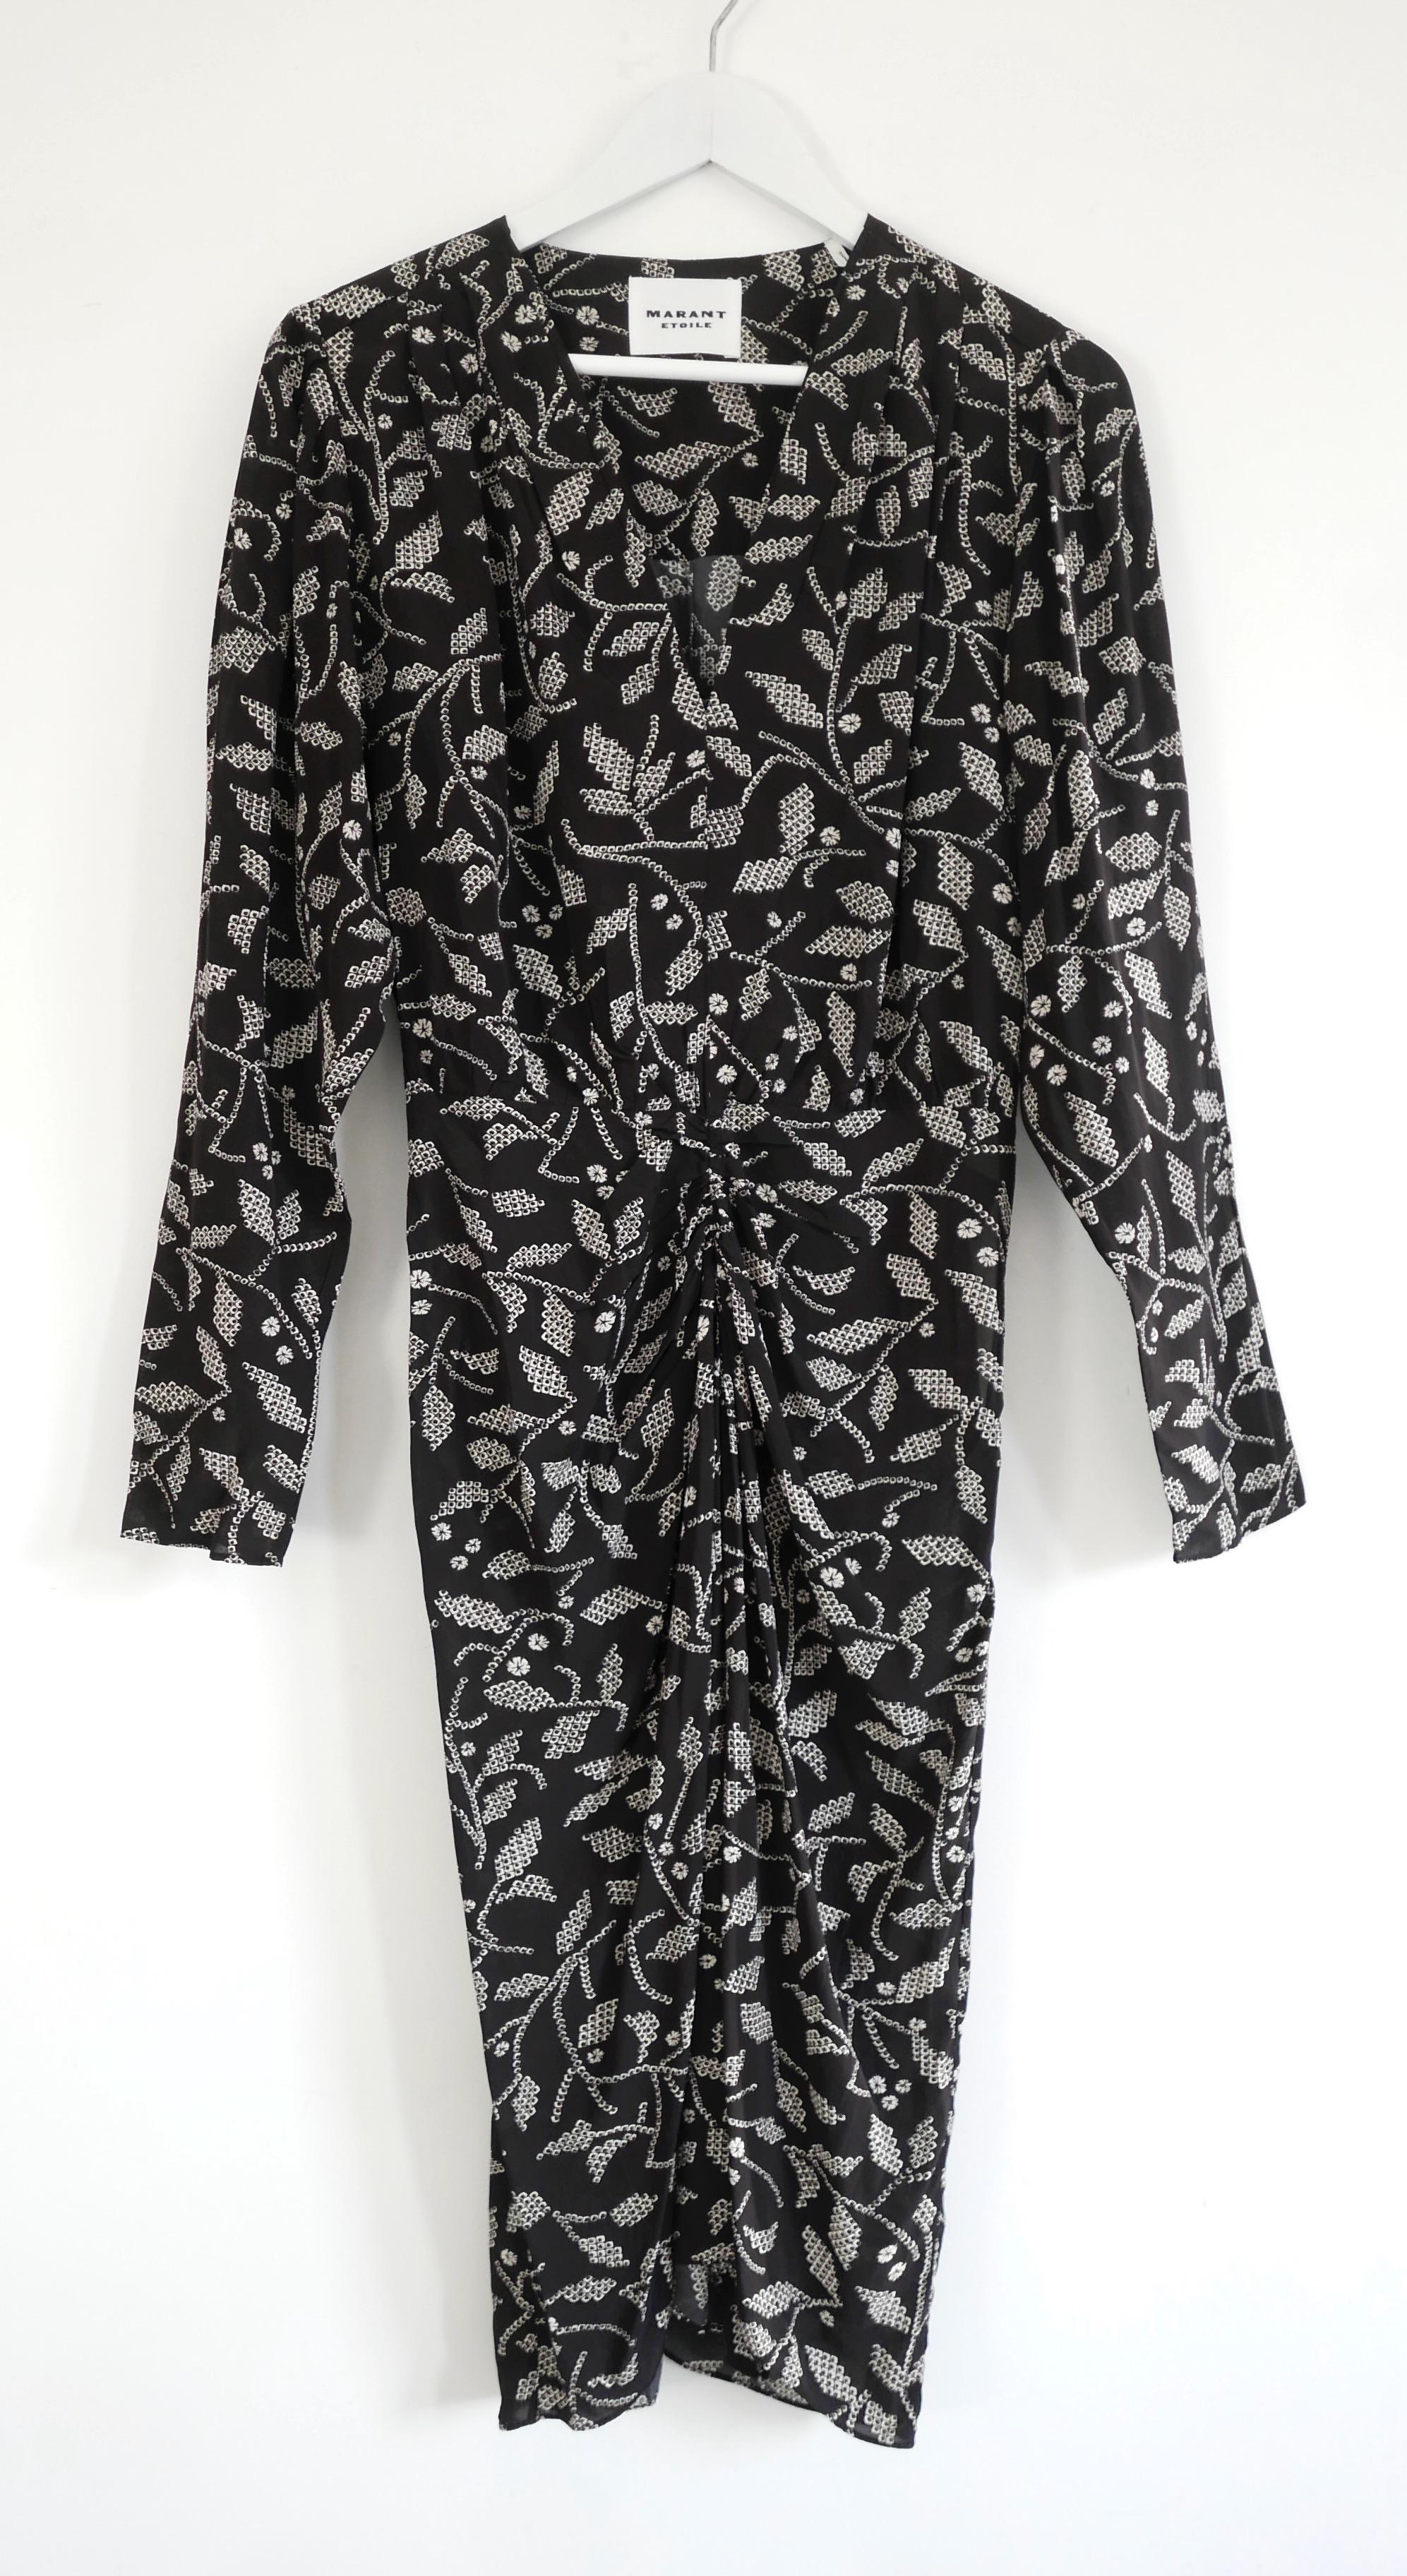 Coolest Isabel Marant Etoile Danalia dress - bought for £595 and unworn. Made from black silk with a woodcut inspired leaf print, it has a soft cut through the bust with v neckline and draped front detail. Has side zip. Size FR36/UK8. Measures